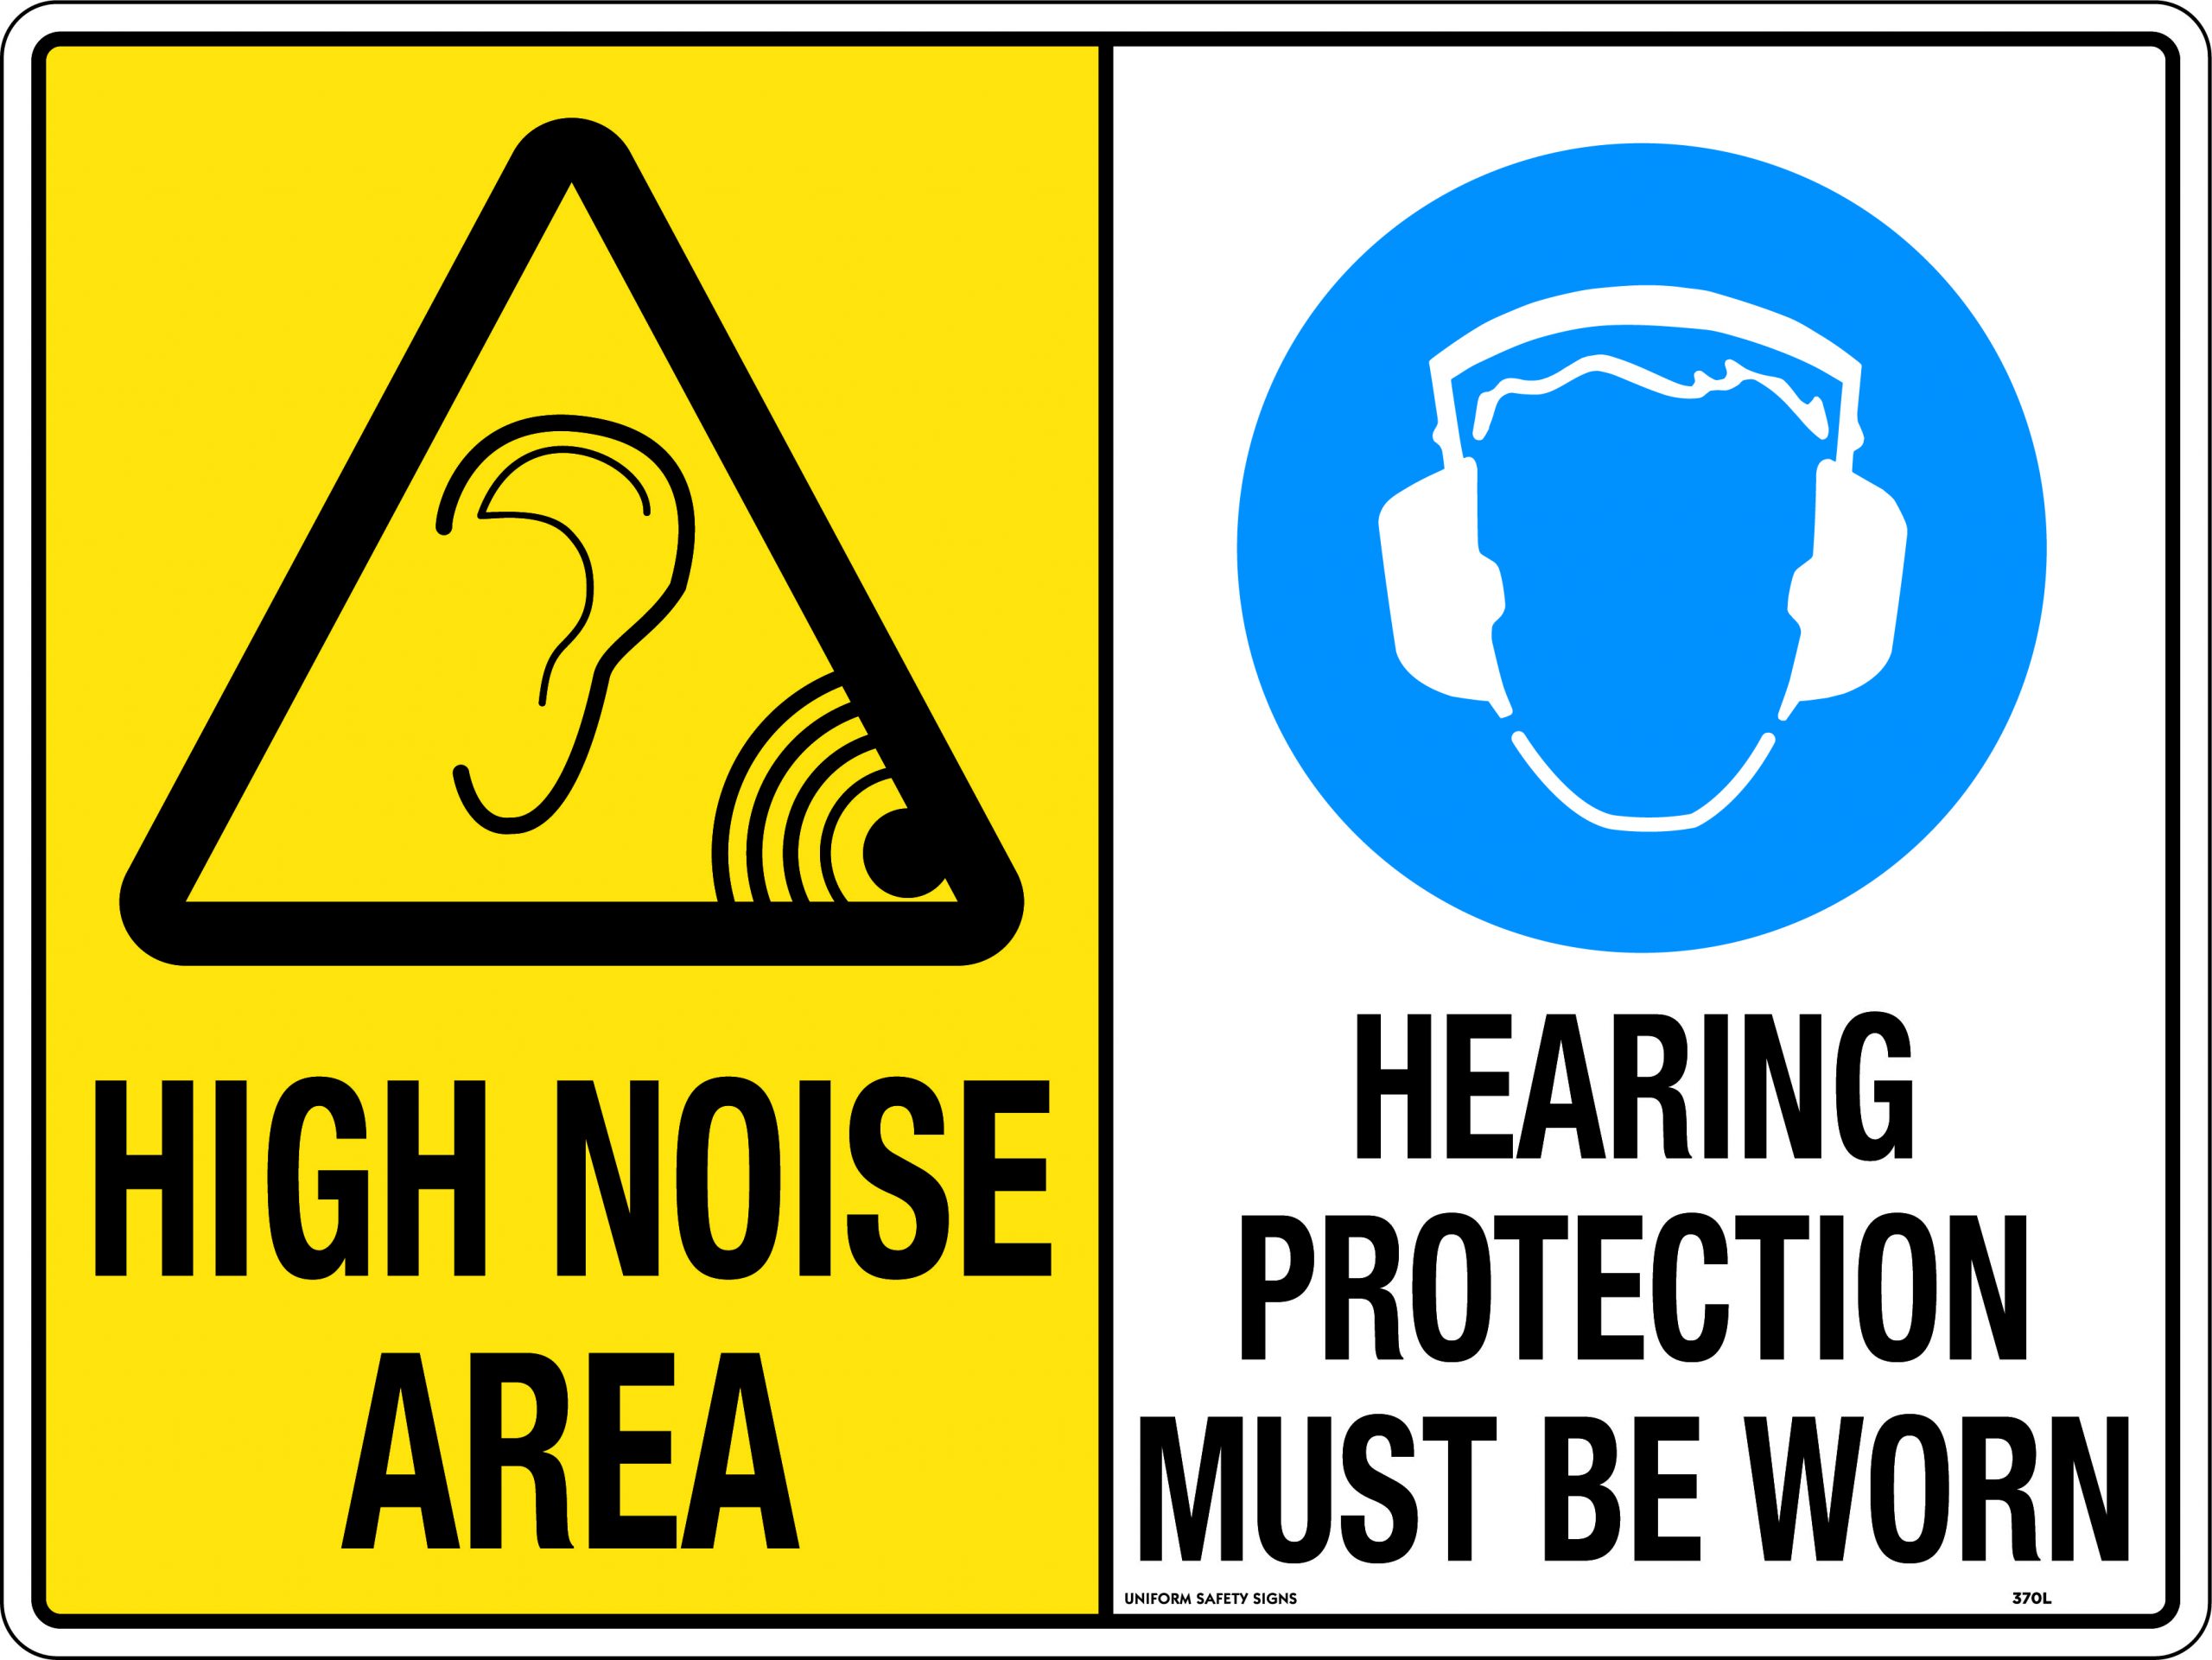 UNIFORM SAFETY 450X300MM METAL MULTI SIGN HIGH NOISE AREA / HEARING